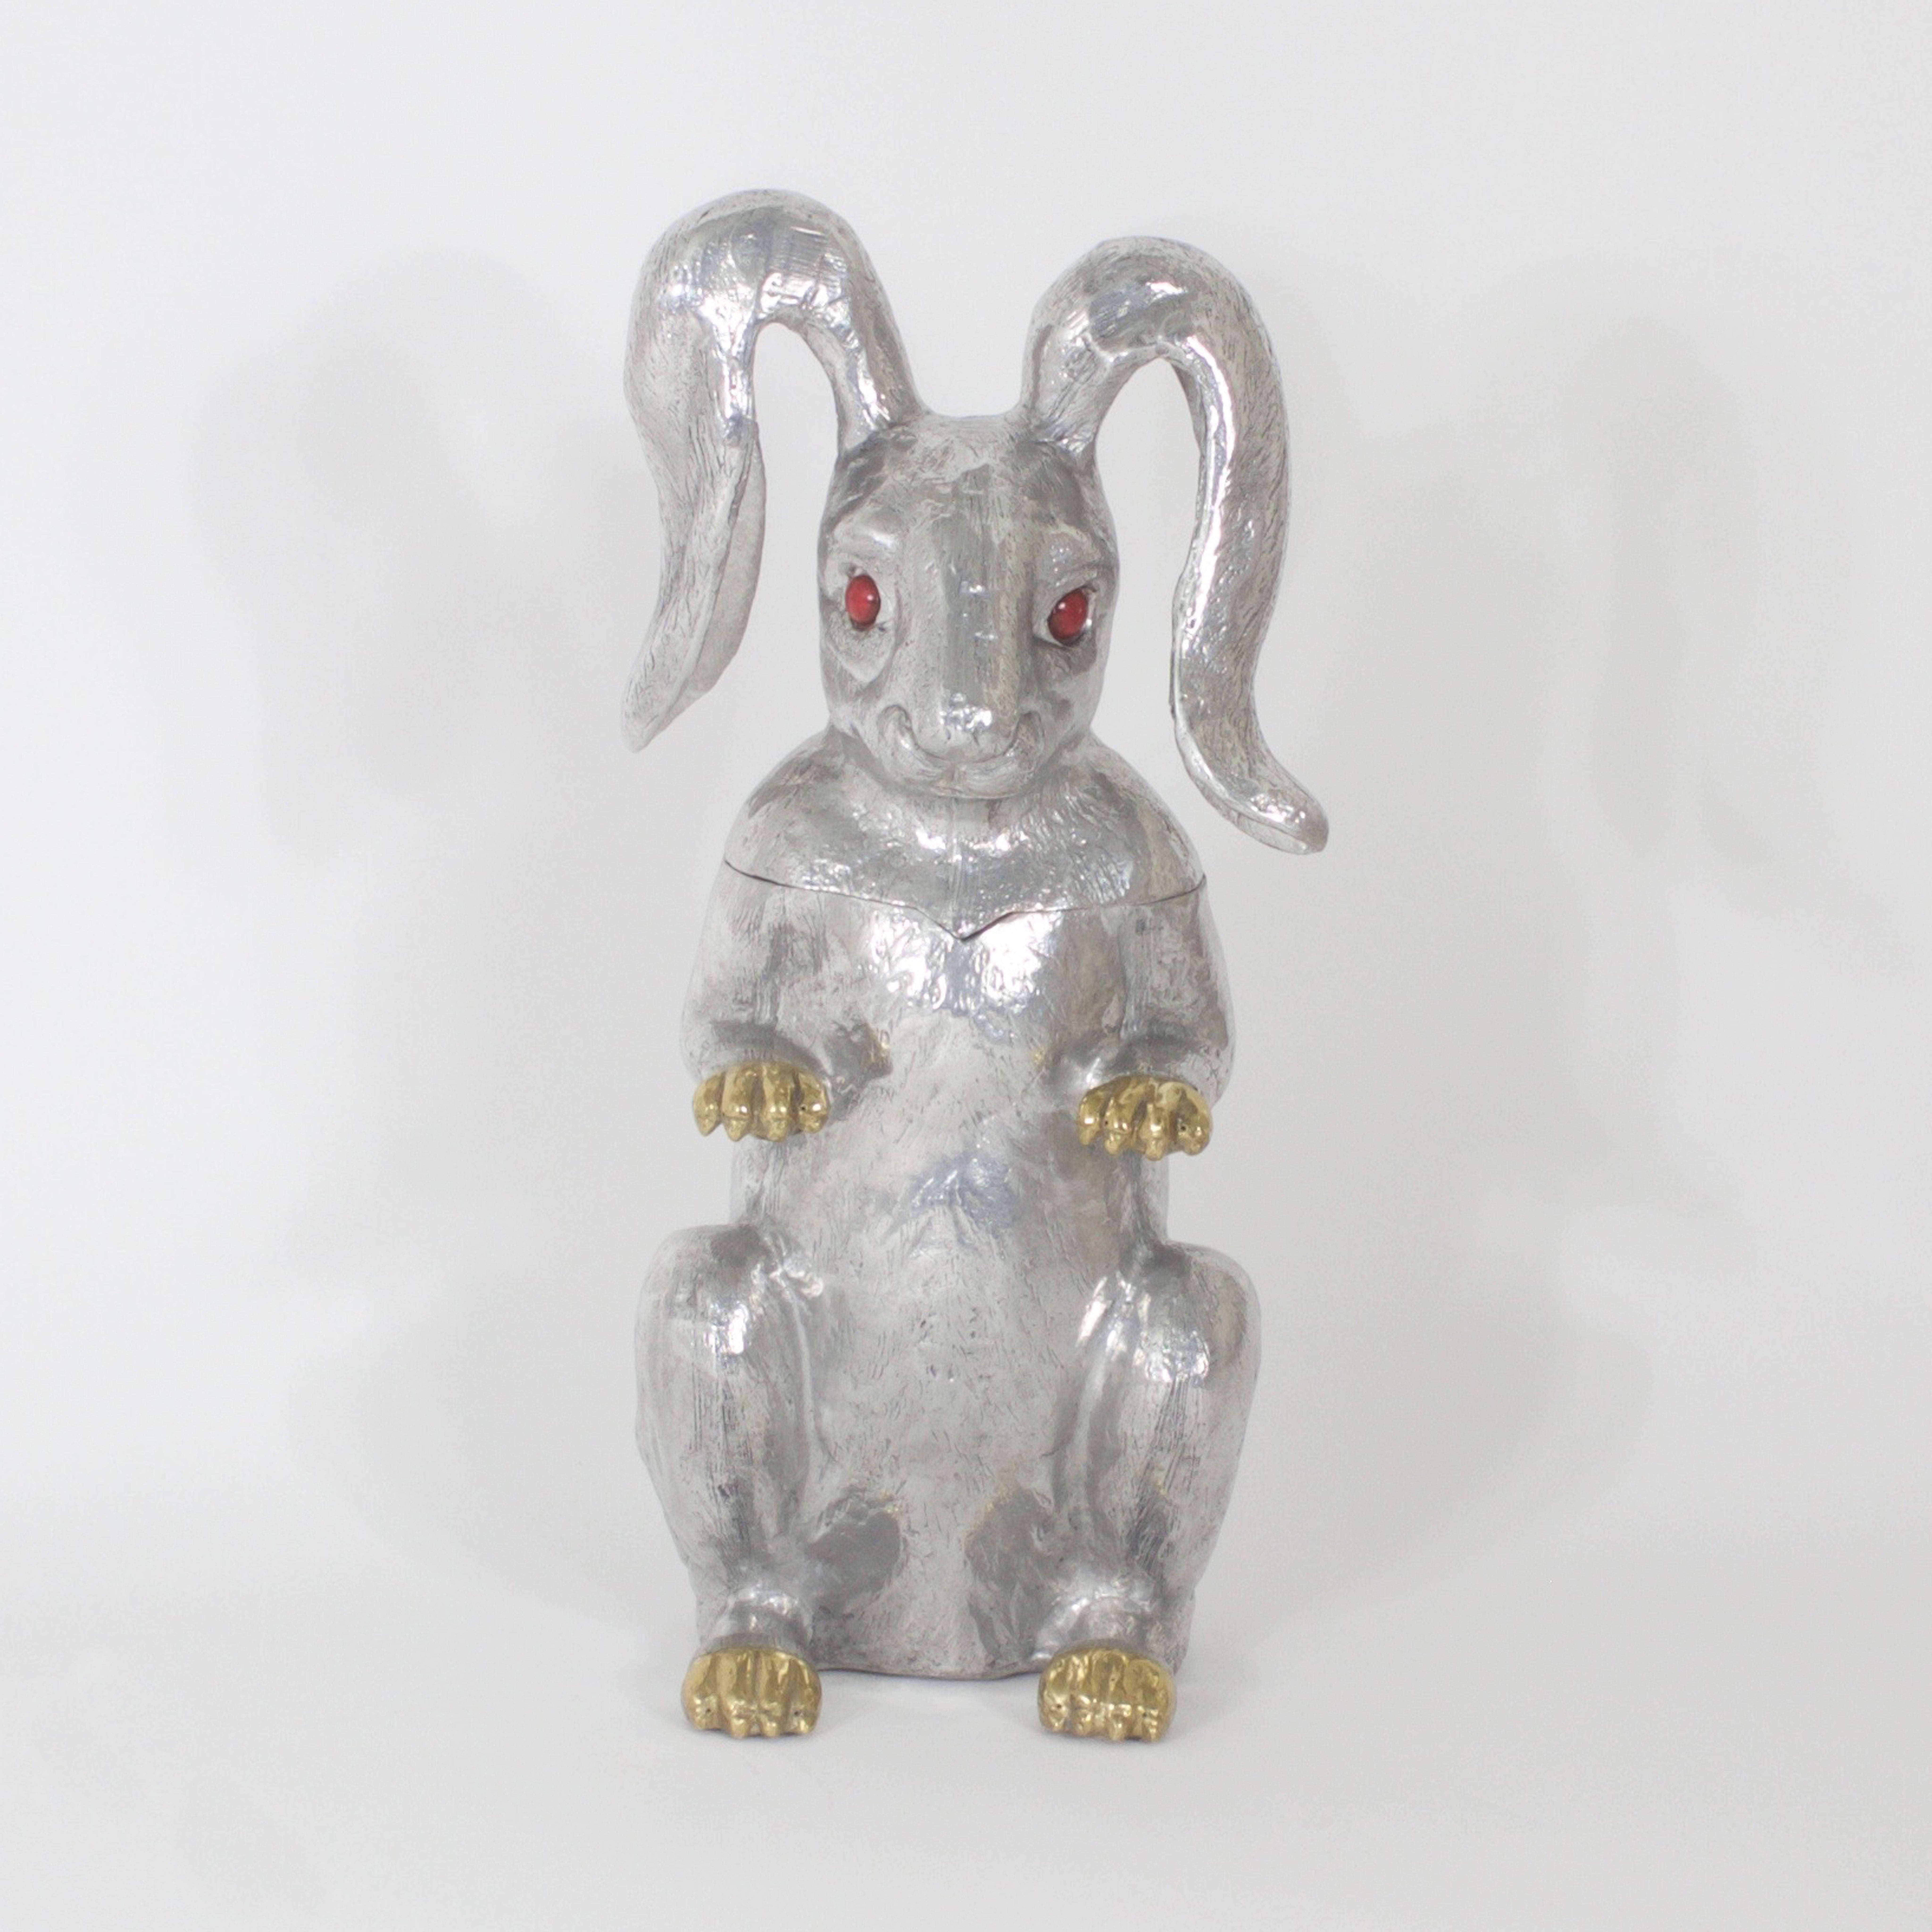 Amusing Arthur Court rabbit working in service as a wine cooler or ice bucket. Having floppy ears, stone eyes, and brass hands and feet. Who would have thought cooling wine could be so much fun. Signed Arthur Court 1986 on the bottom. Newly polished.